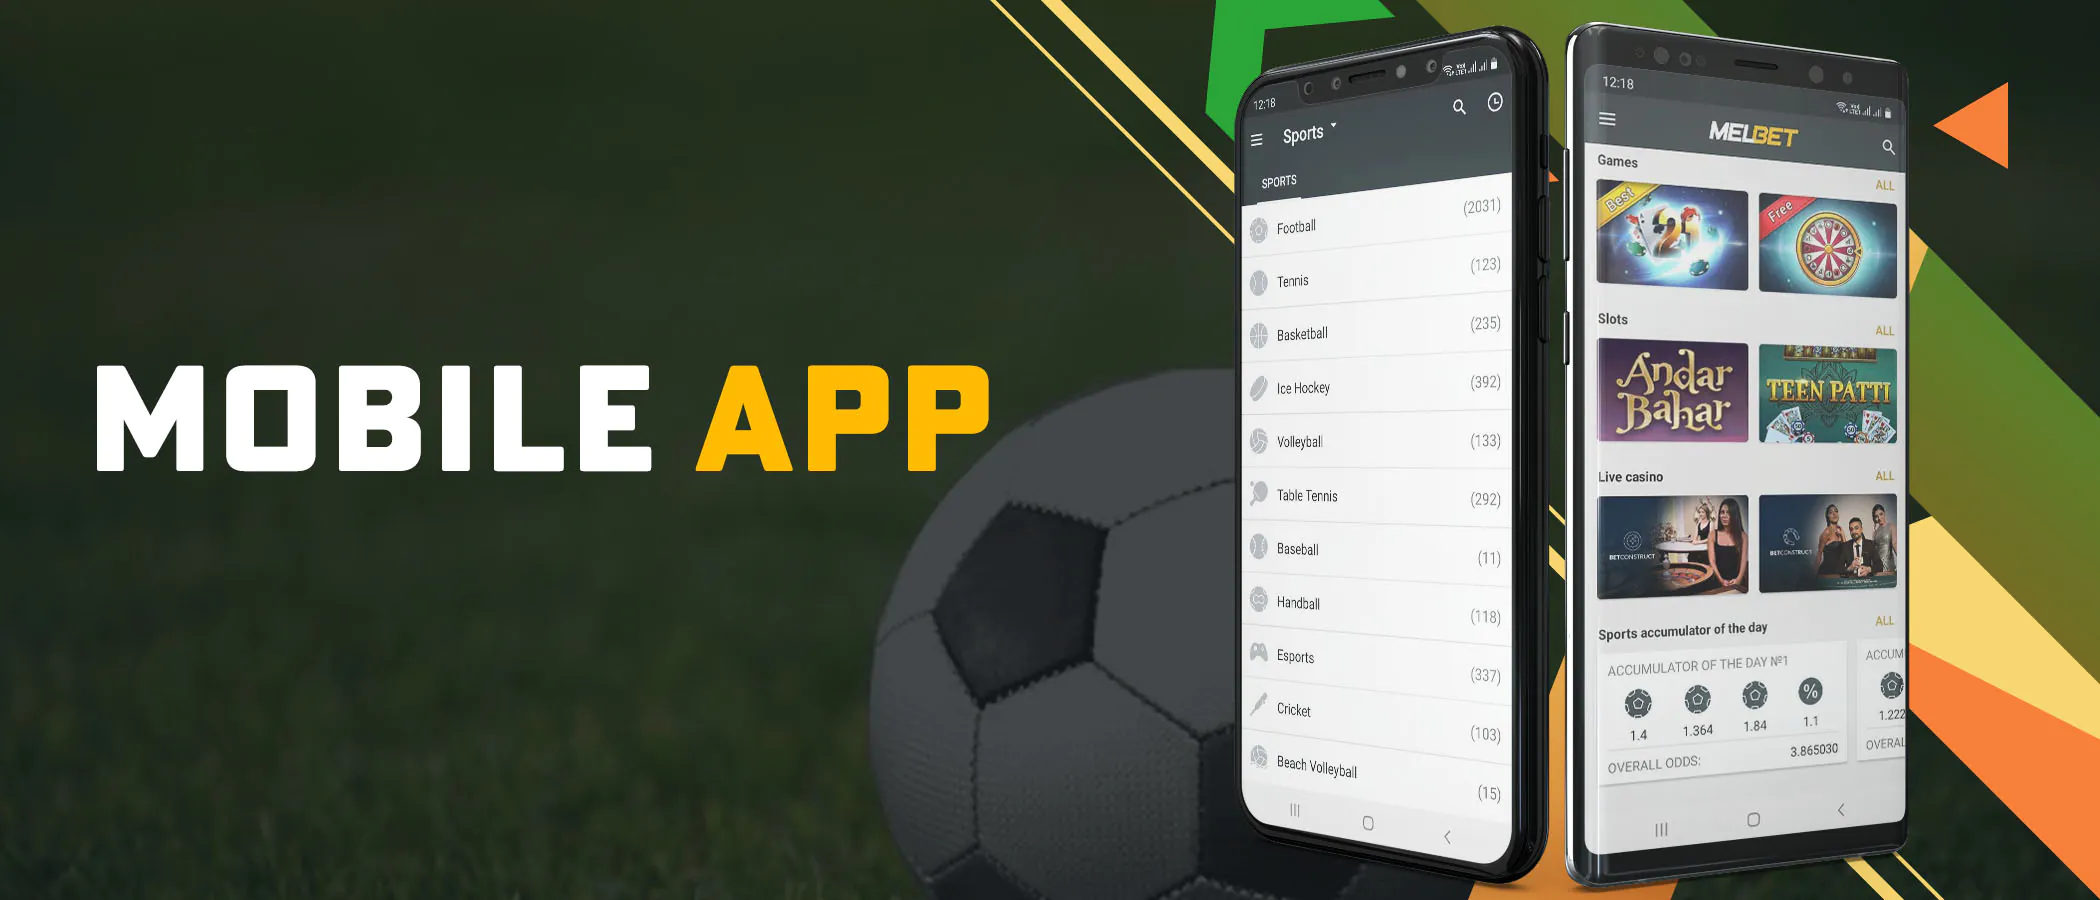 The mobile app version of review Melbet India is seen as the best platform for punters in India.